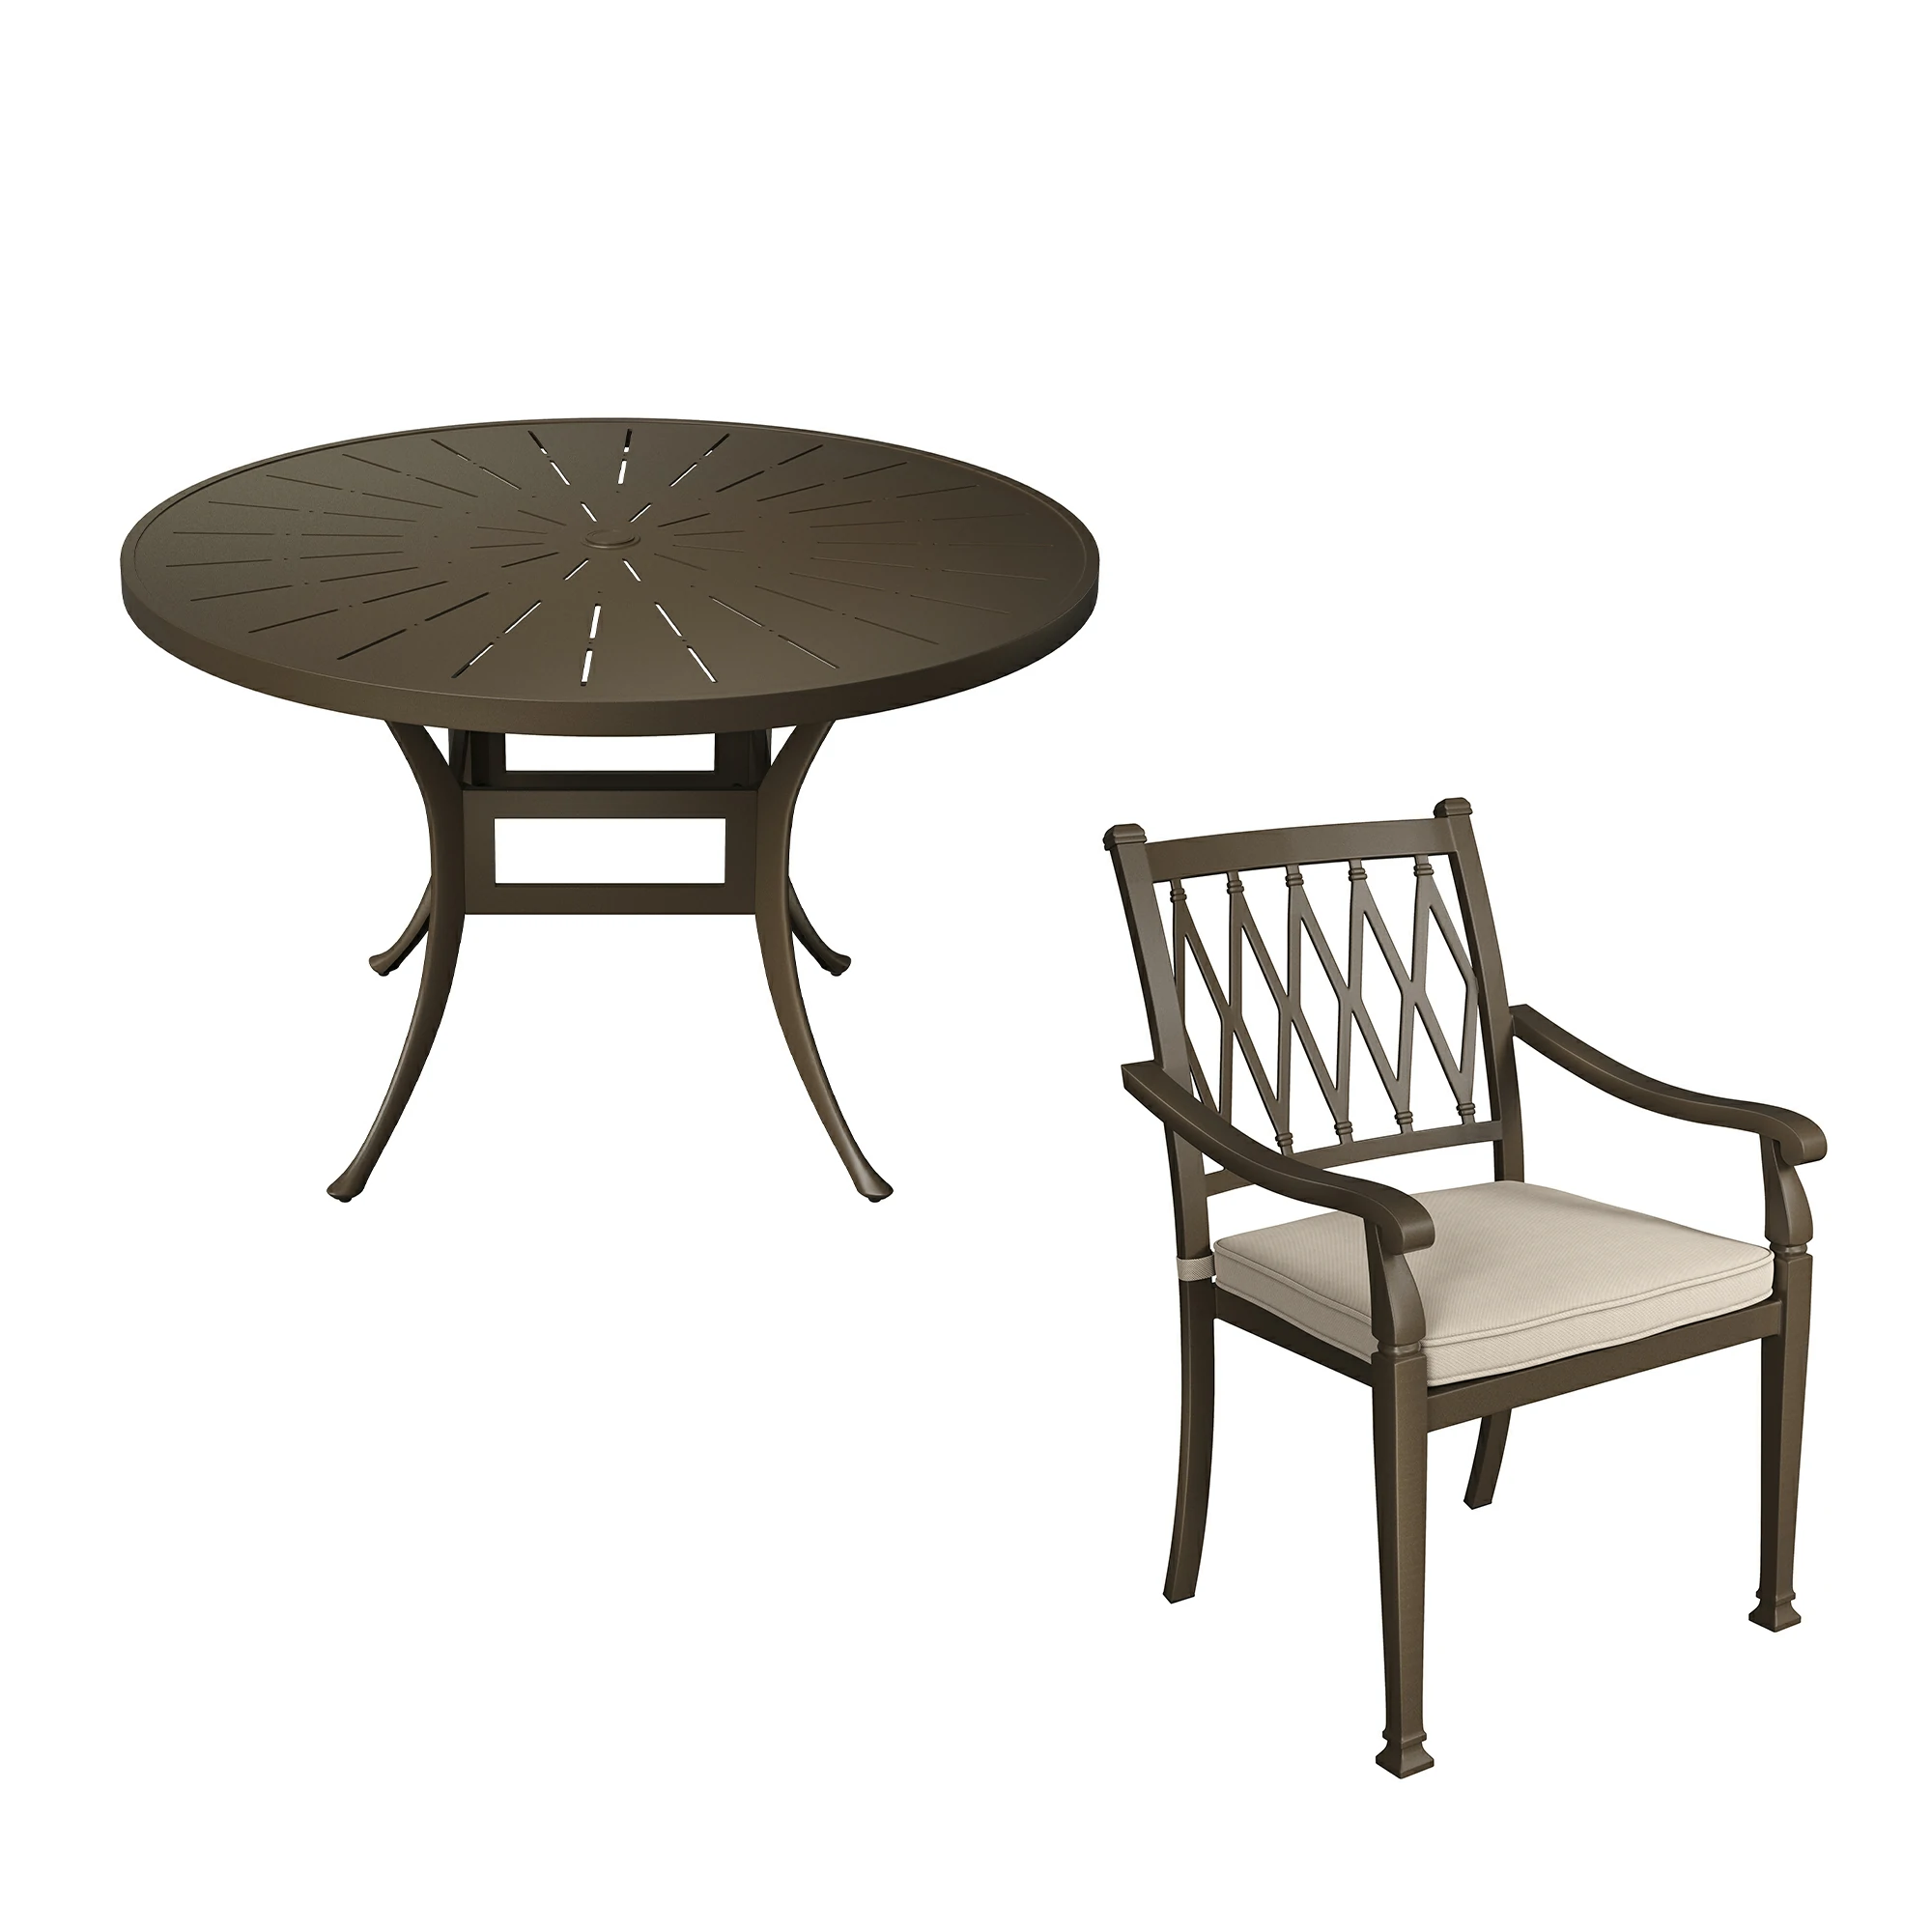 5 Pieces Cast Aluminum Outdoor Dining Set 4 Ergonomic Design Outdoor Chair with Cushions and 1 Round Table with 2.1 Inch Umbrella Hole